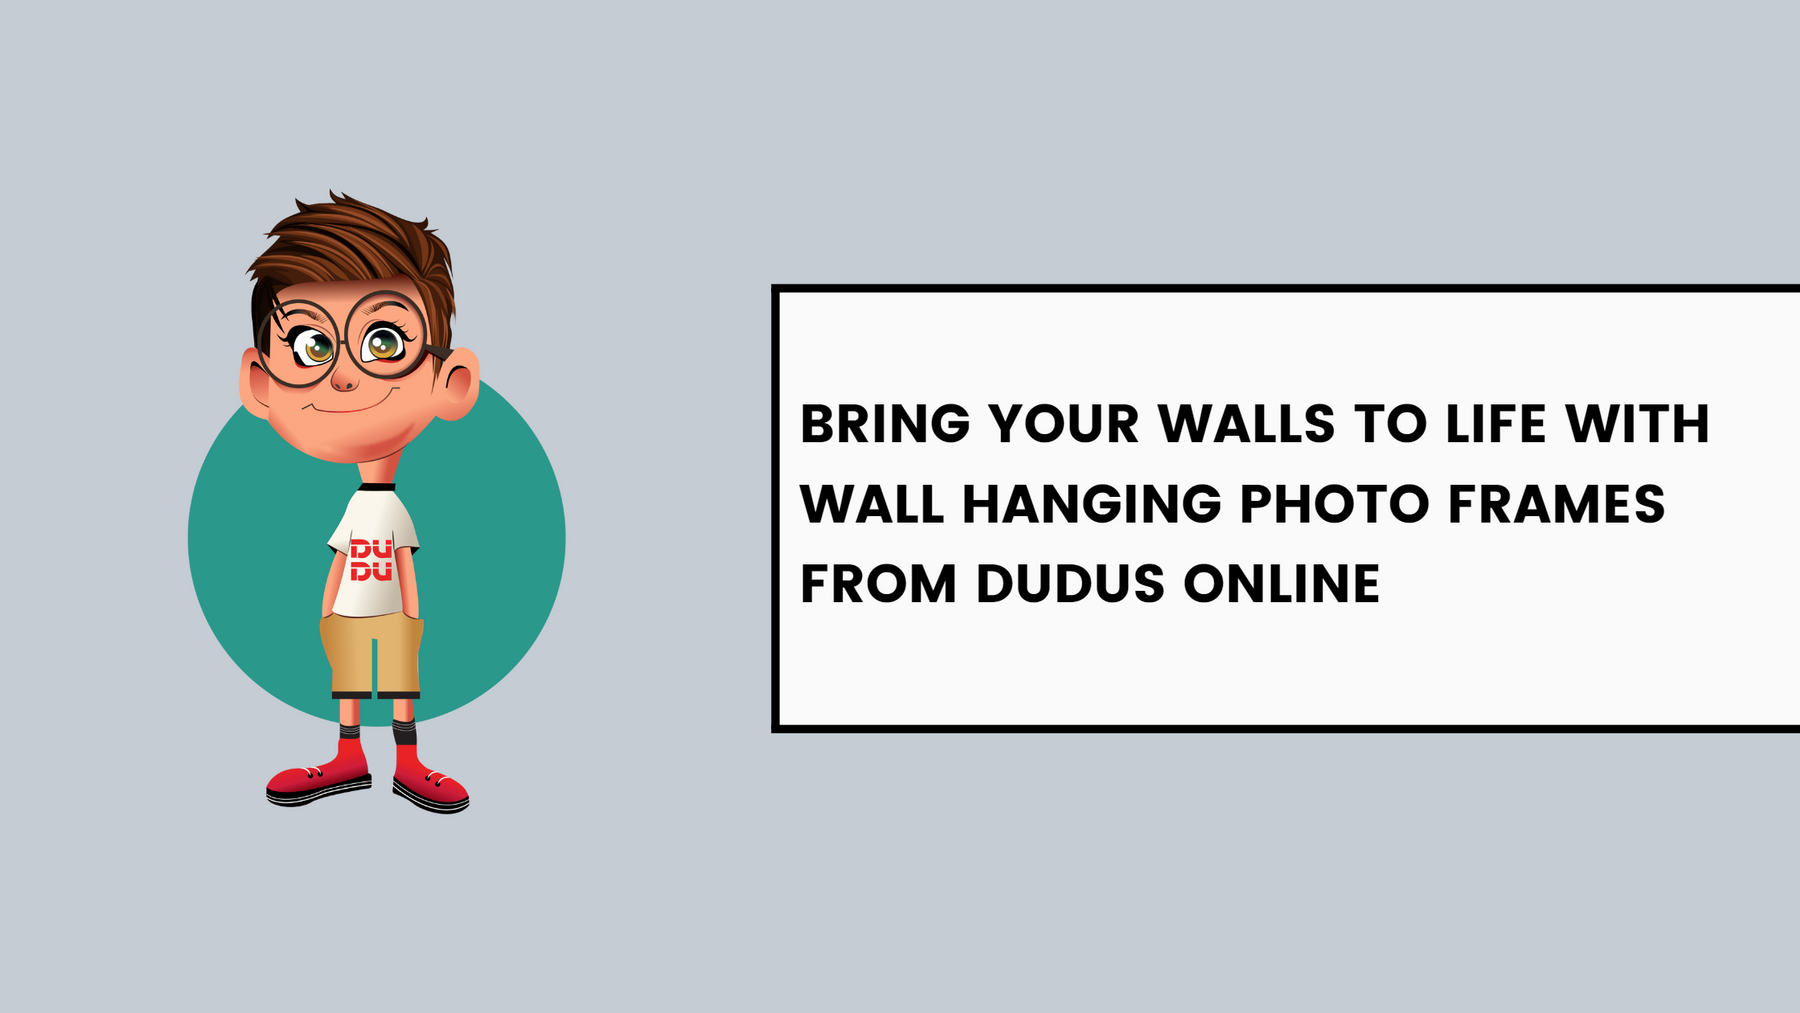 Bring Your Walls to Life with Wall Hanging Photo Frames from Dudus Online